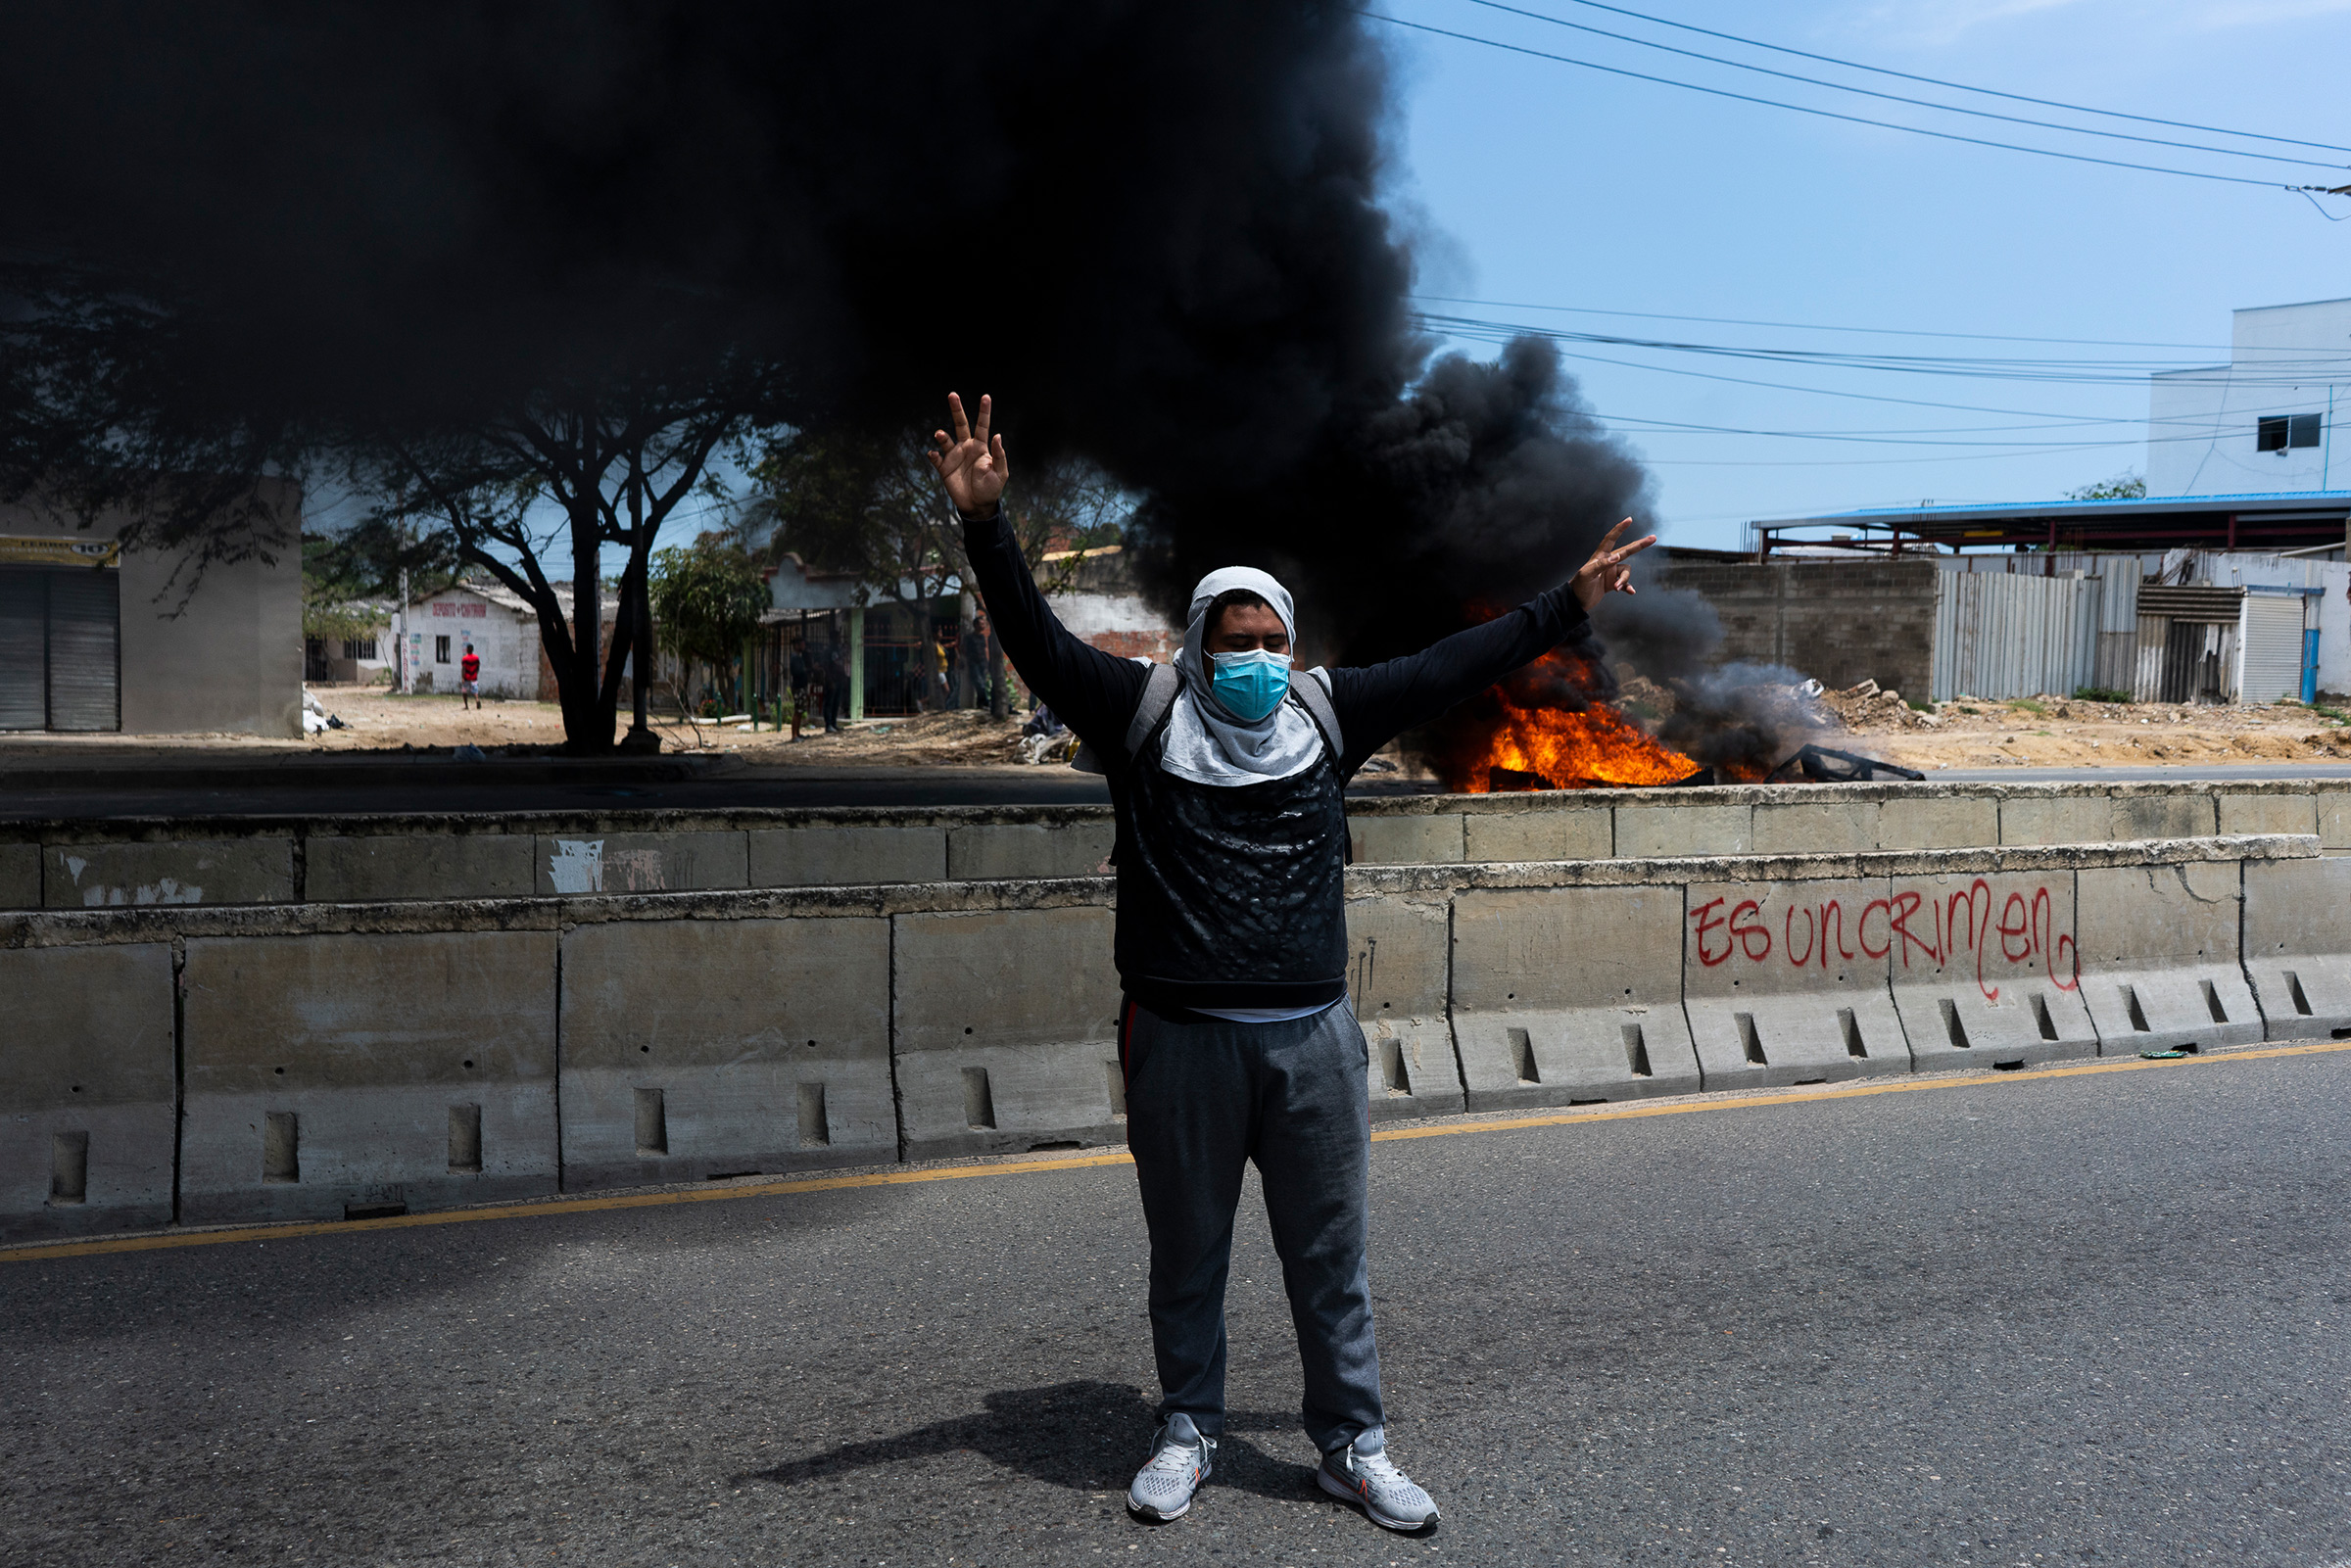 May 1, 2021 - Barranquilla, Colombia. A protester raises his hands in the midst of clashes with the police on Circunvalar Avenue Picture by: Charlie Cordero